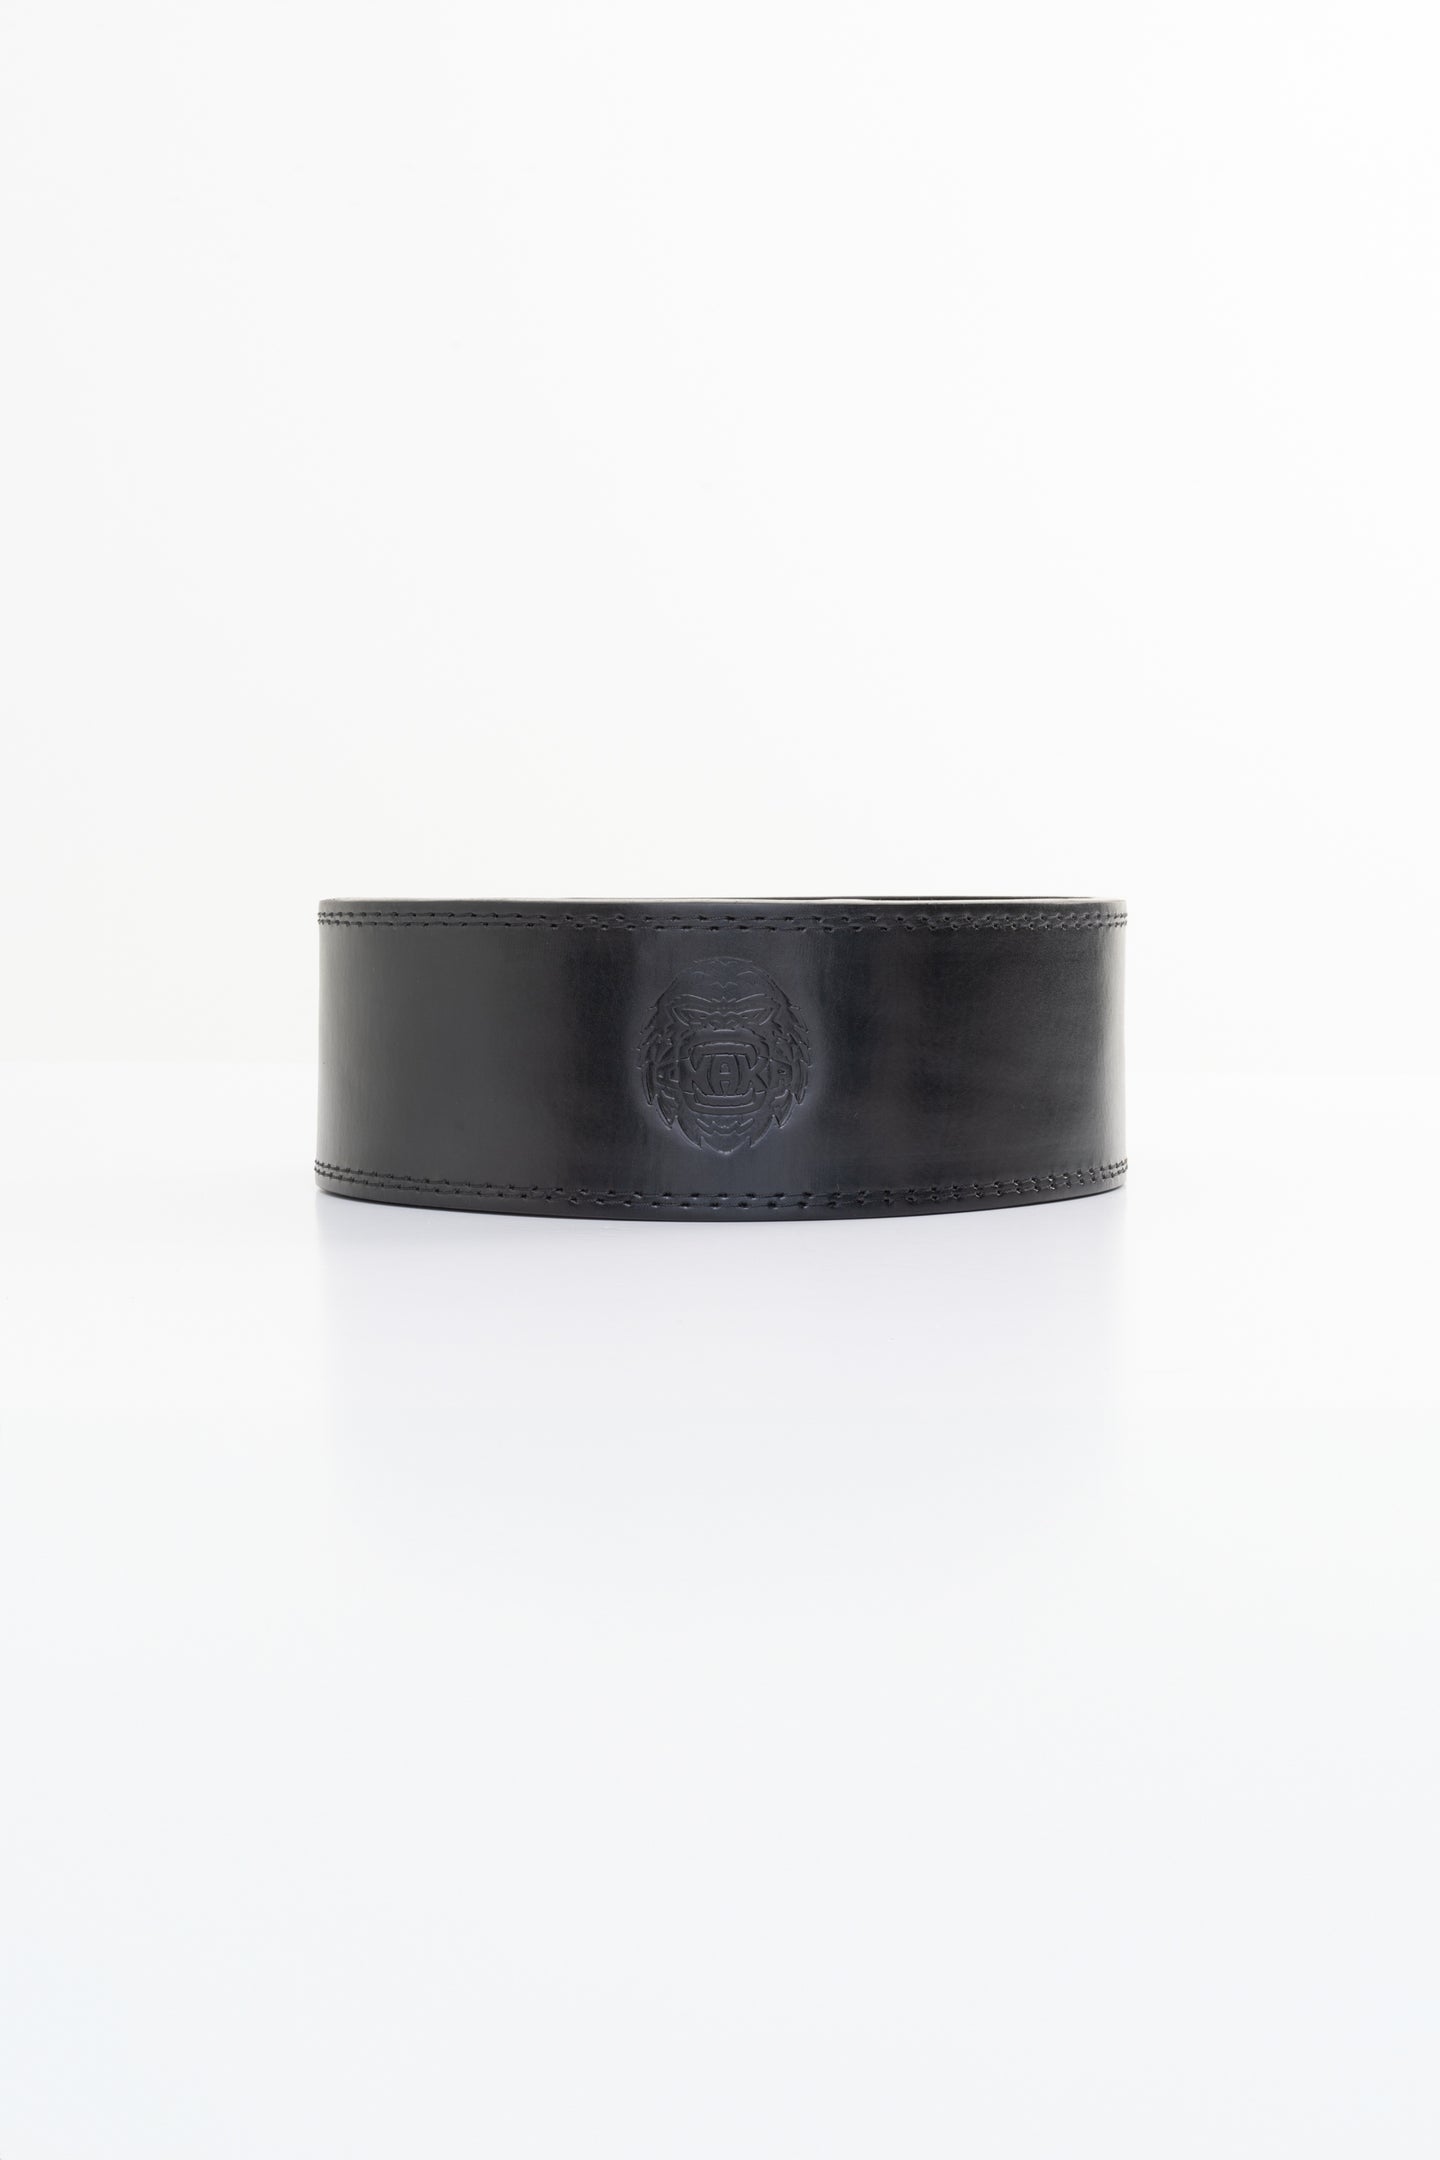 13MM LEATHER LEVER BELT- BLACKOUT COLLECTION